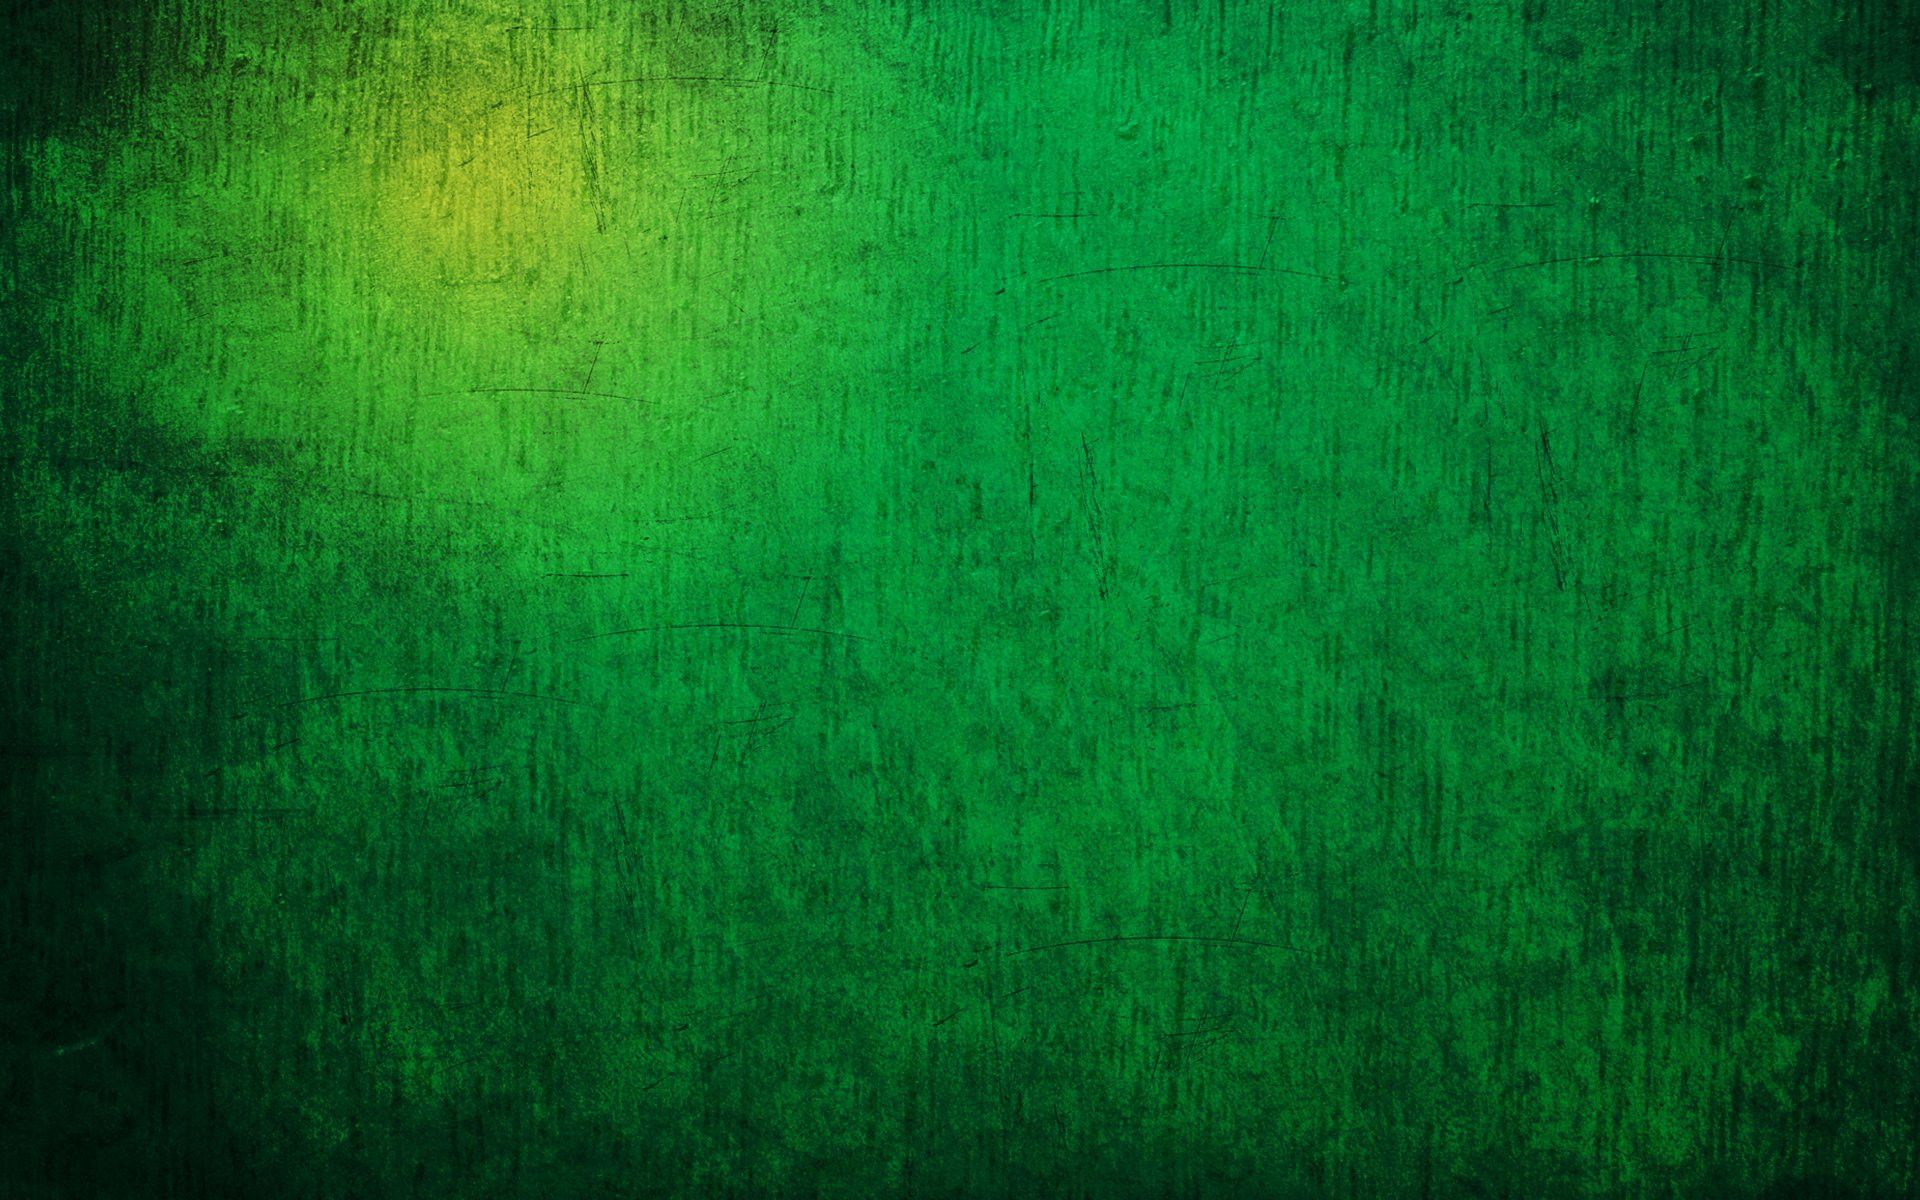 Green background images   SF Wallpaper